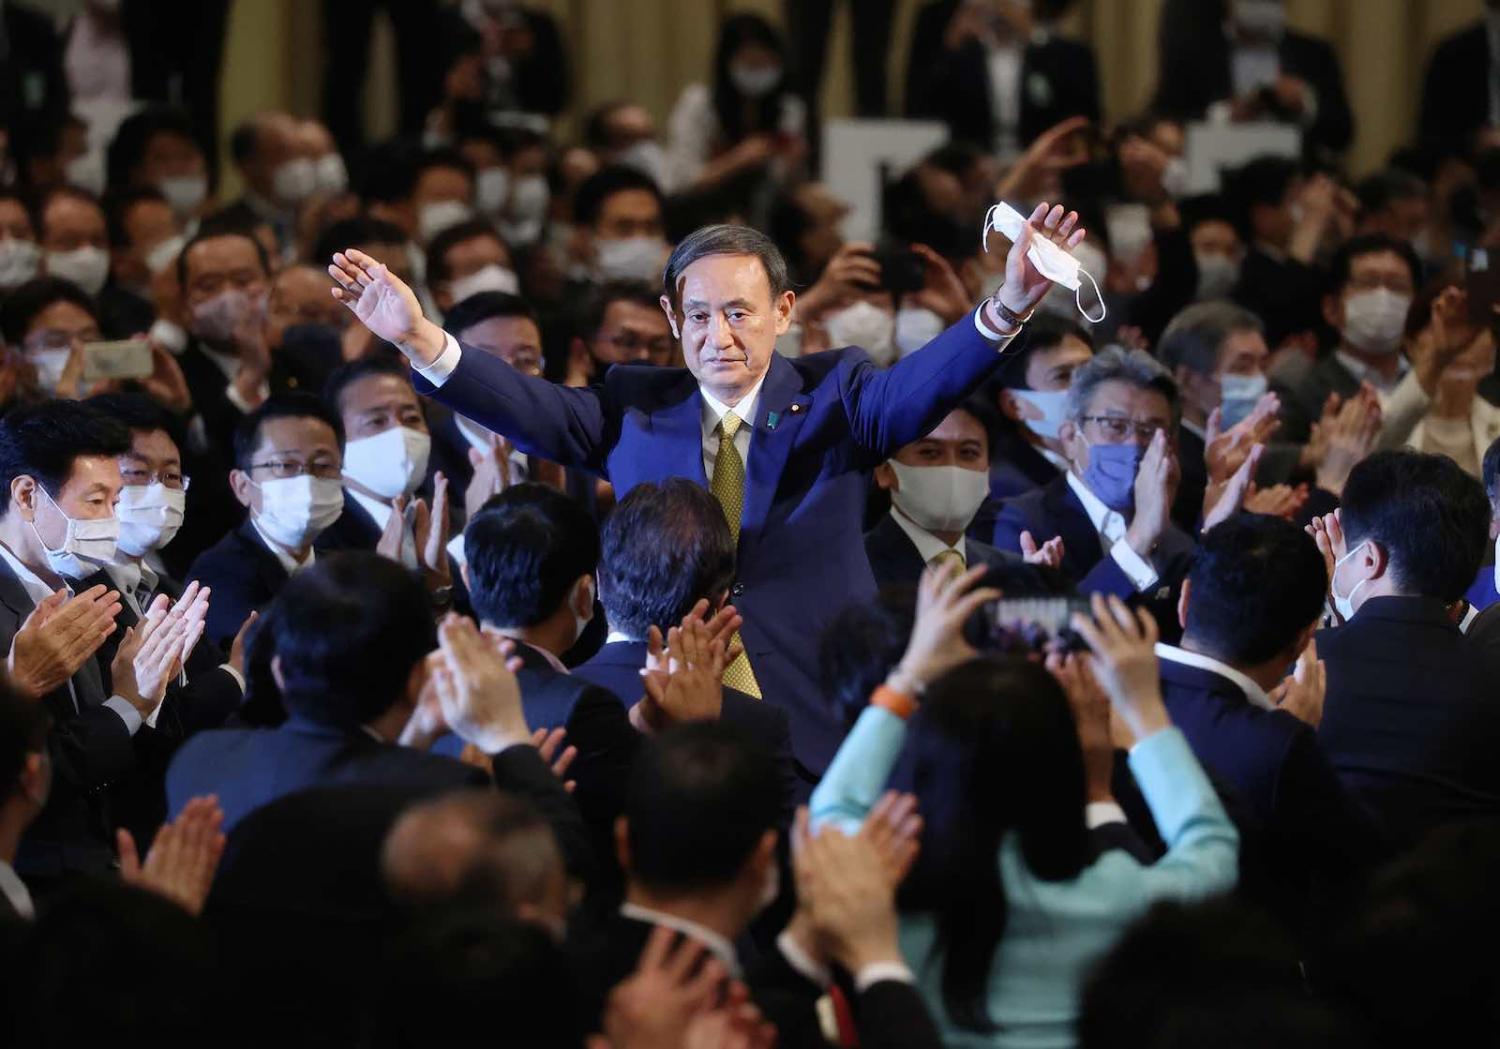 Japan’s Chief Cabinet Secretary Yoshihide Suga reacts after he was elected as new head of Japan’s ruling Liberal Democratic Party on Monday (AFP via Getty Images)